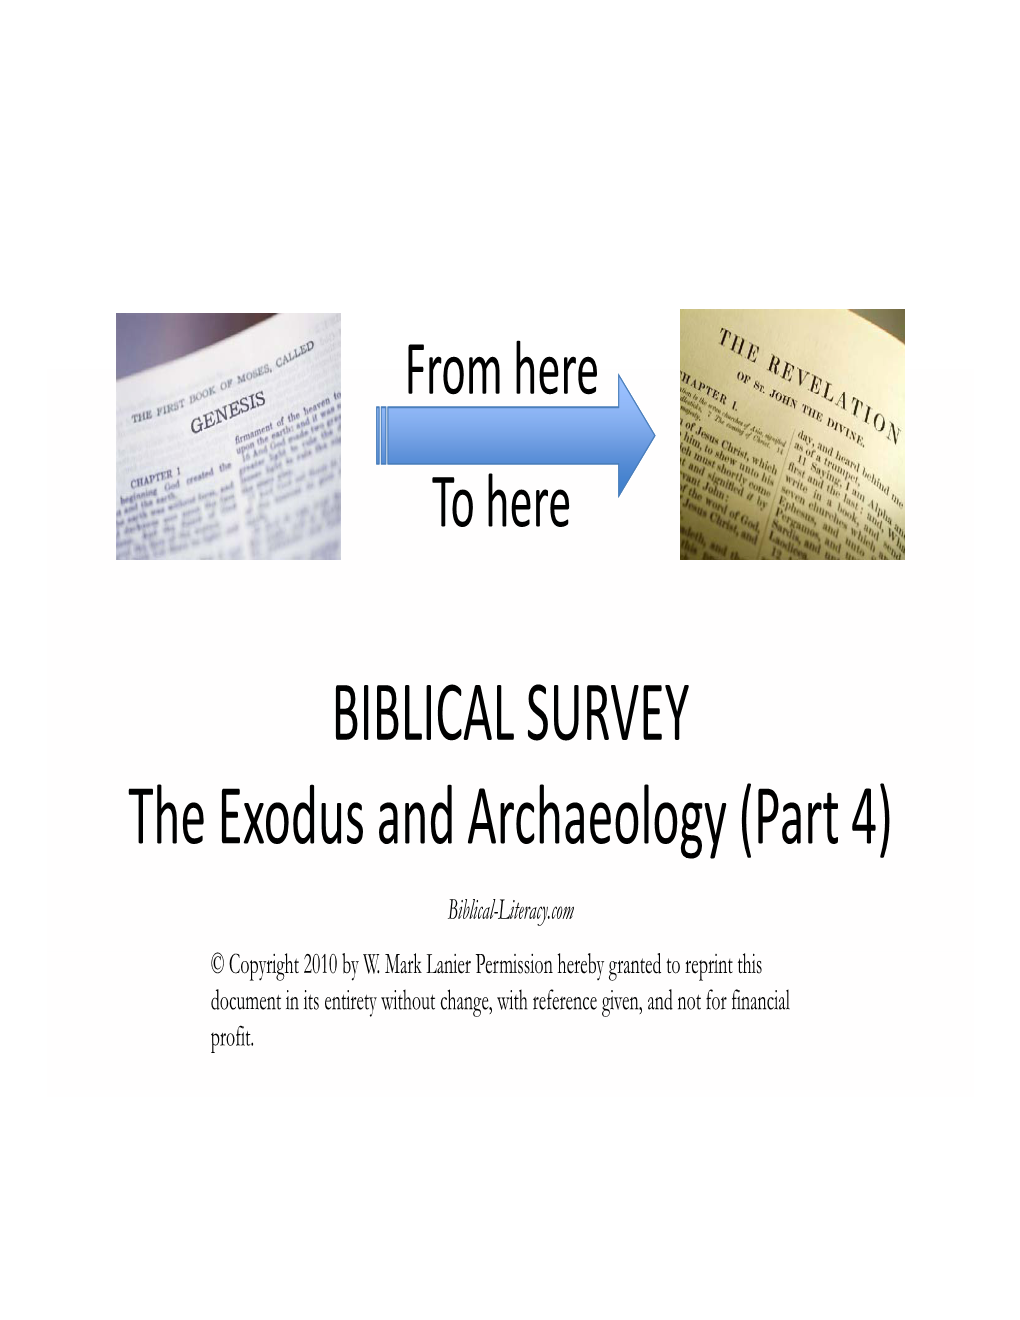 BIBLICAL SURVEY the Exodus and Archaeology (Part 4)